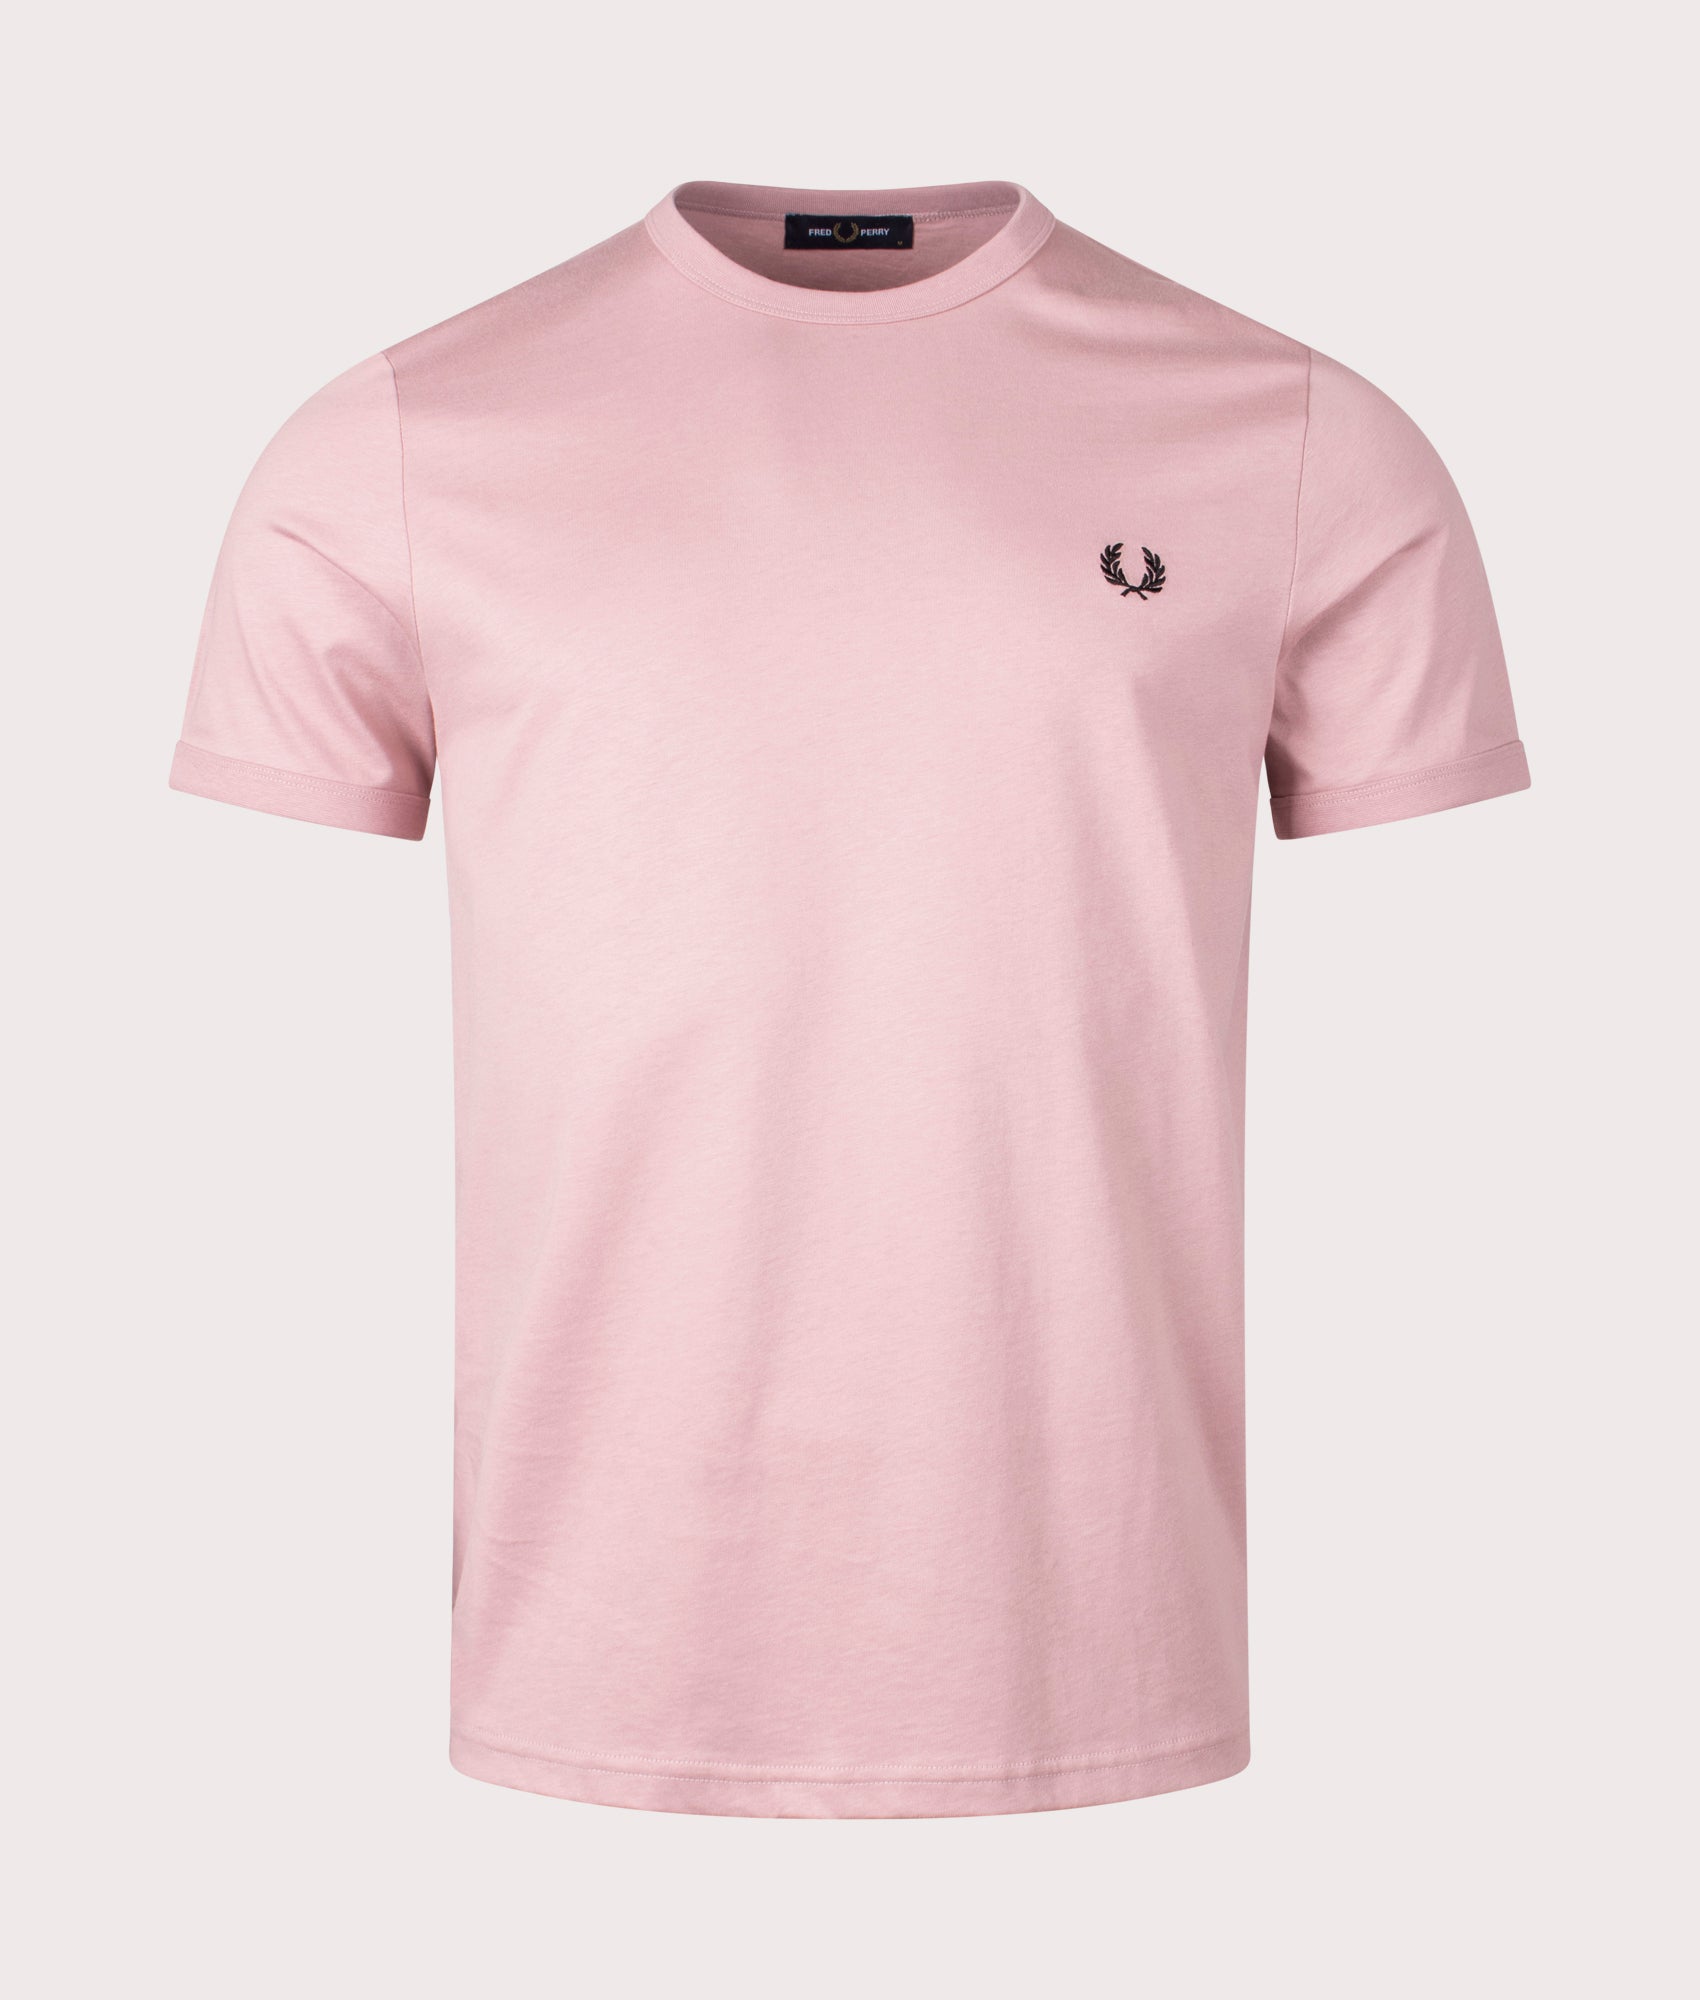 Fred Perry Mens Ringer T-Shirt - Colour: S51 Dusty Rose Pink - Size: XXL